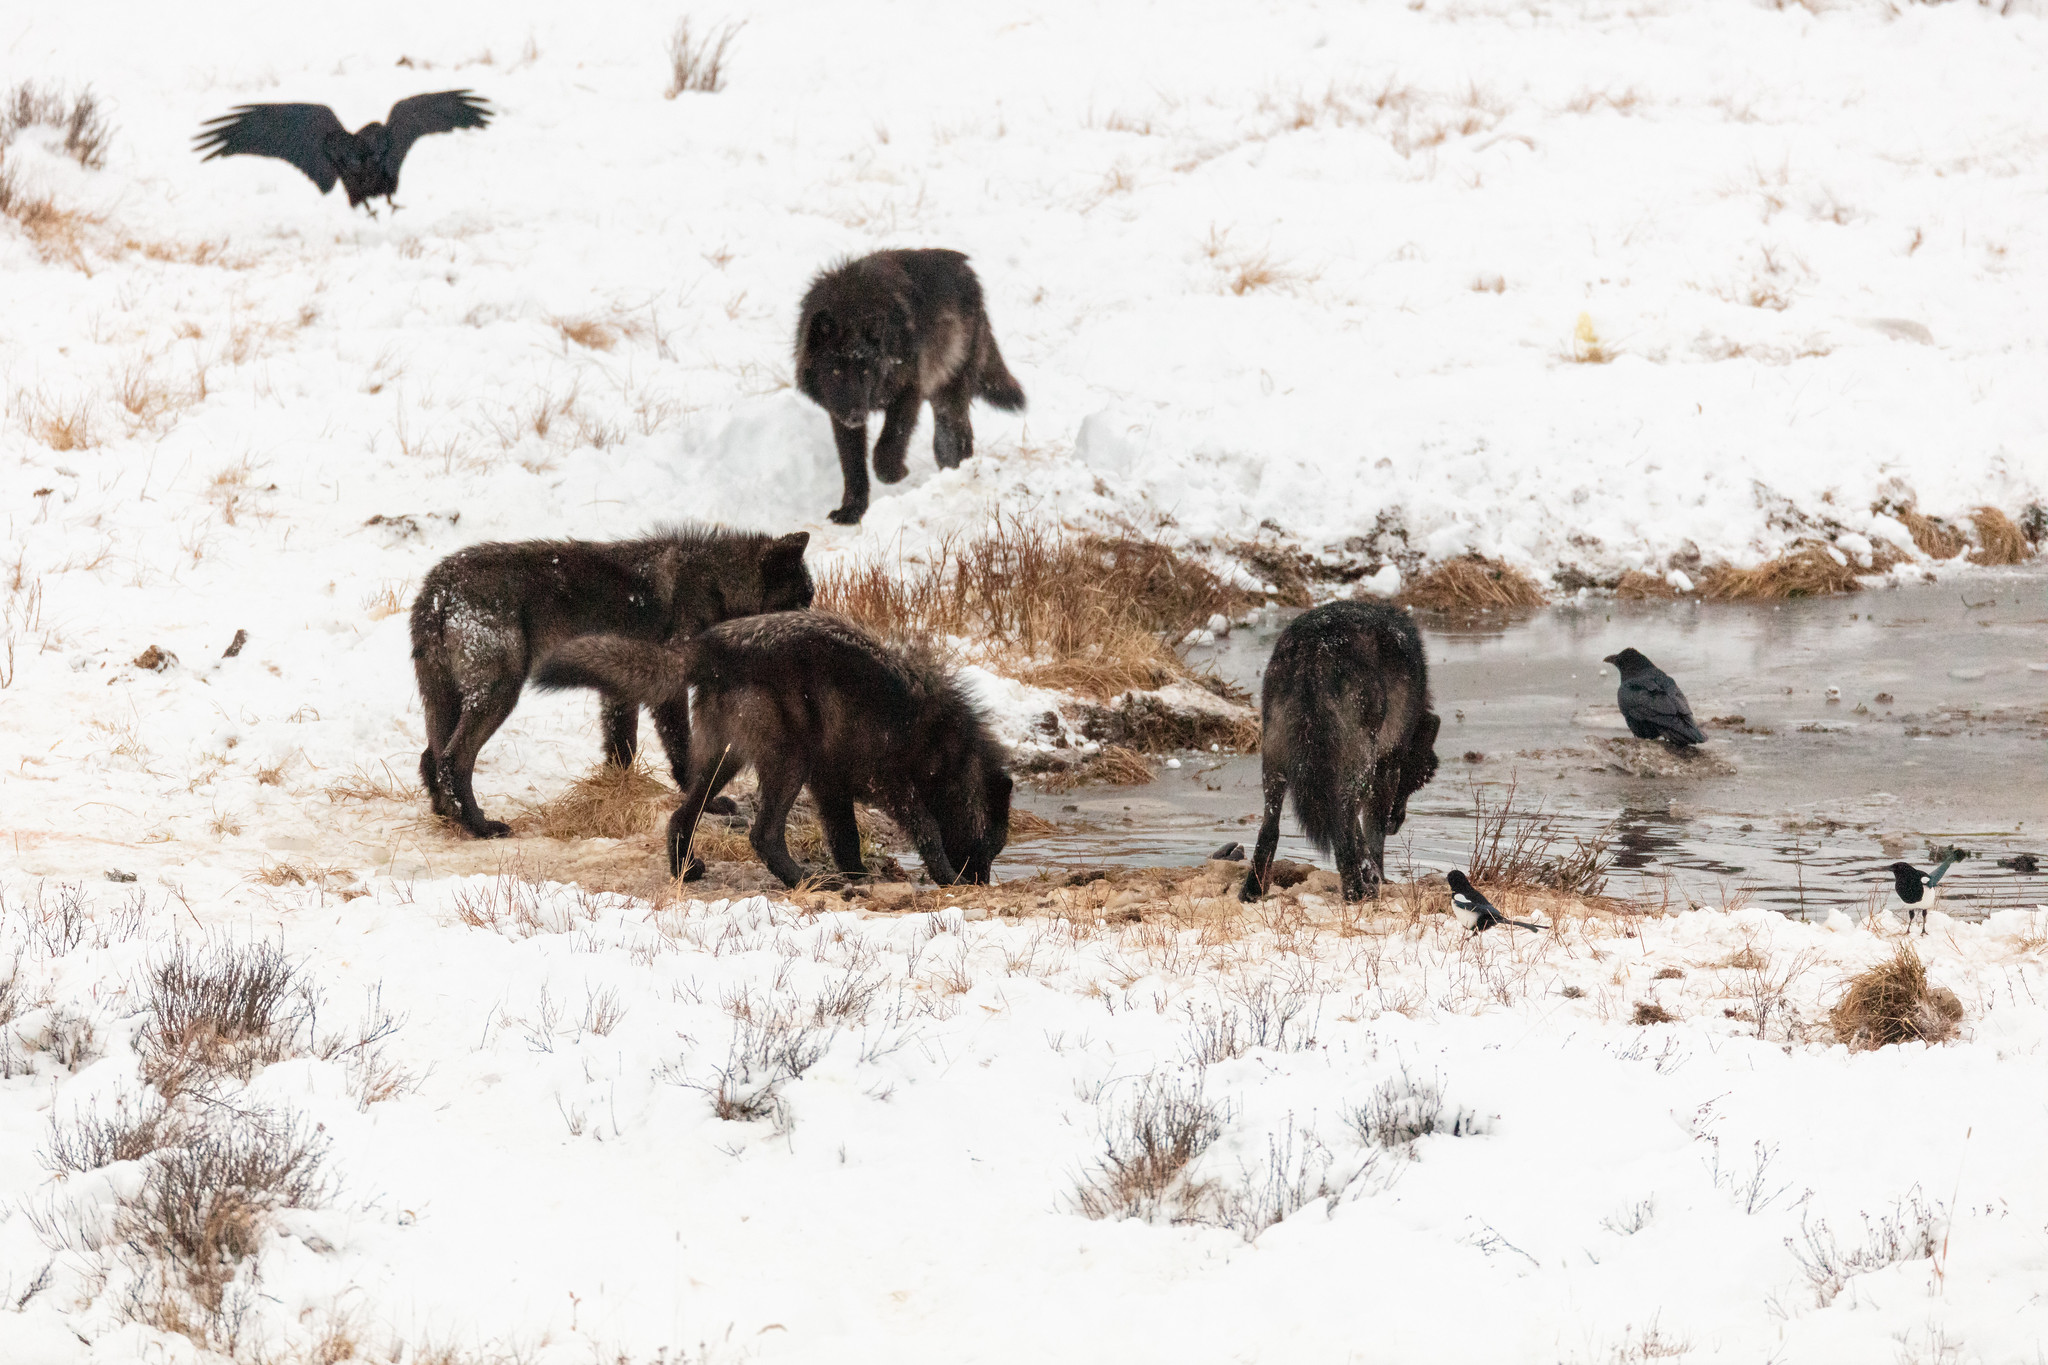 Wolves feed on a bison carcass at Blacktail Ponds